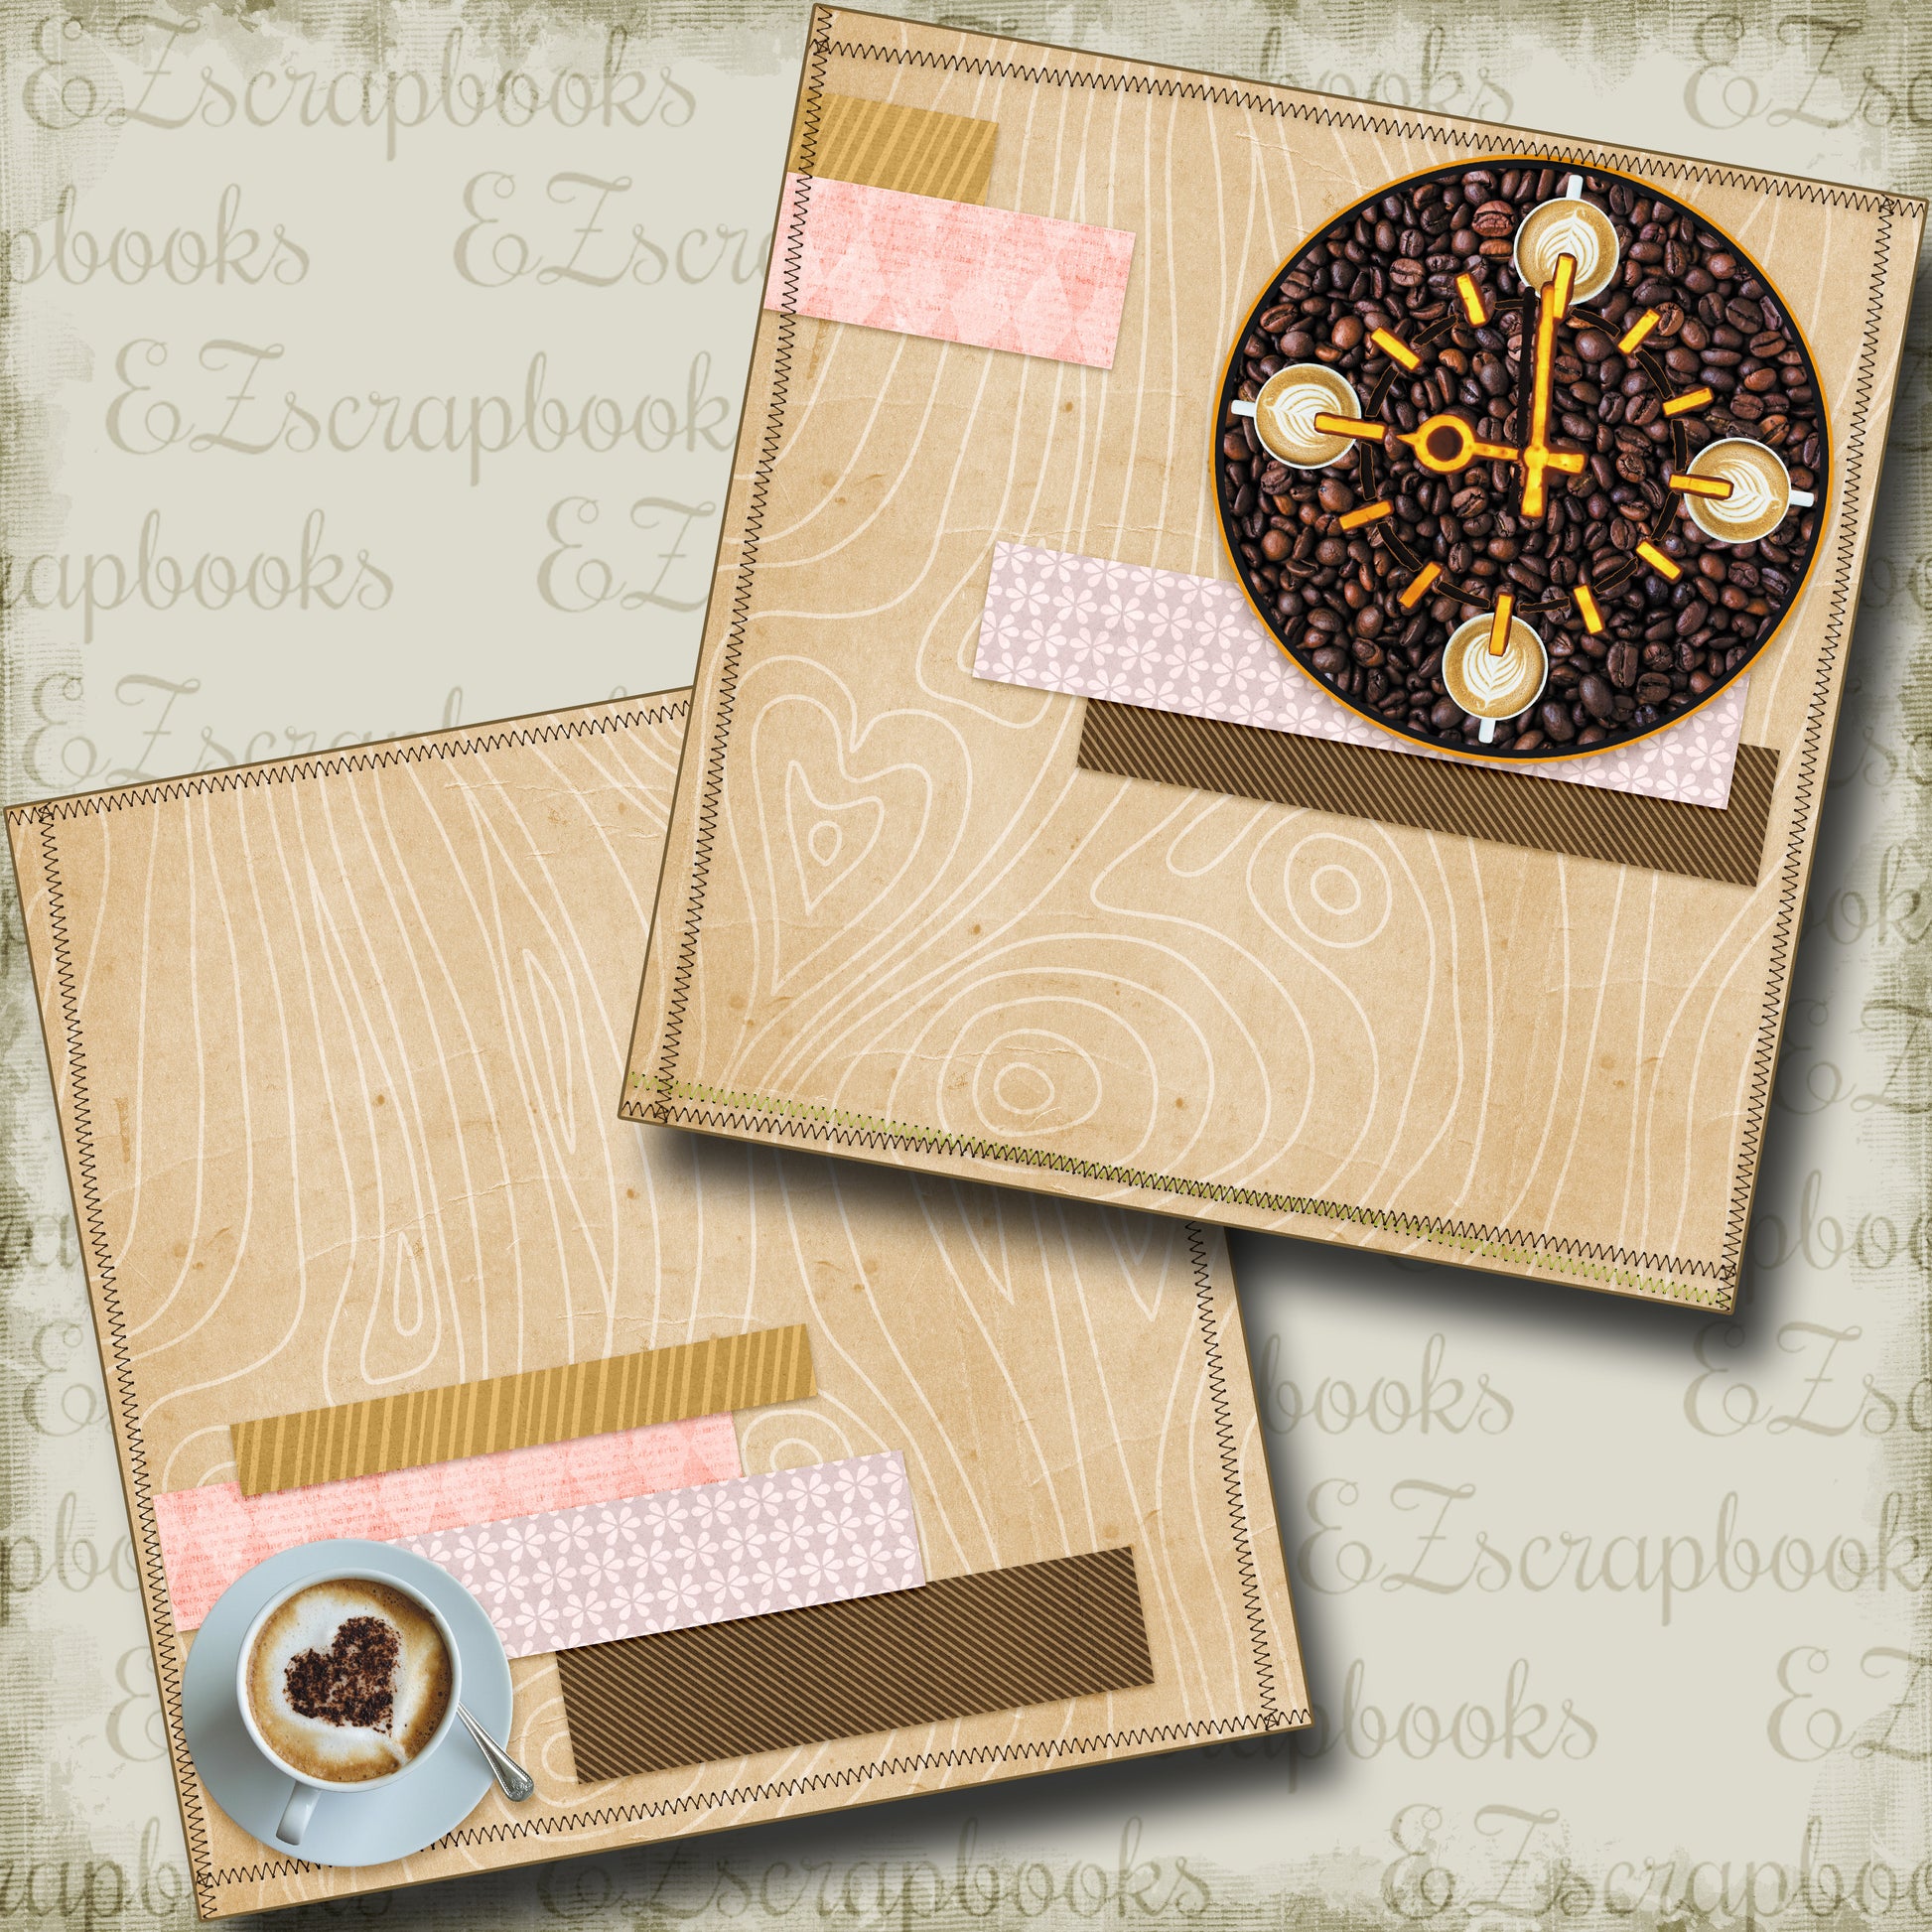 Time for Coffee NPM - 3843 - EZscrapbooks Scrapbook Layouts coffee, Foods